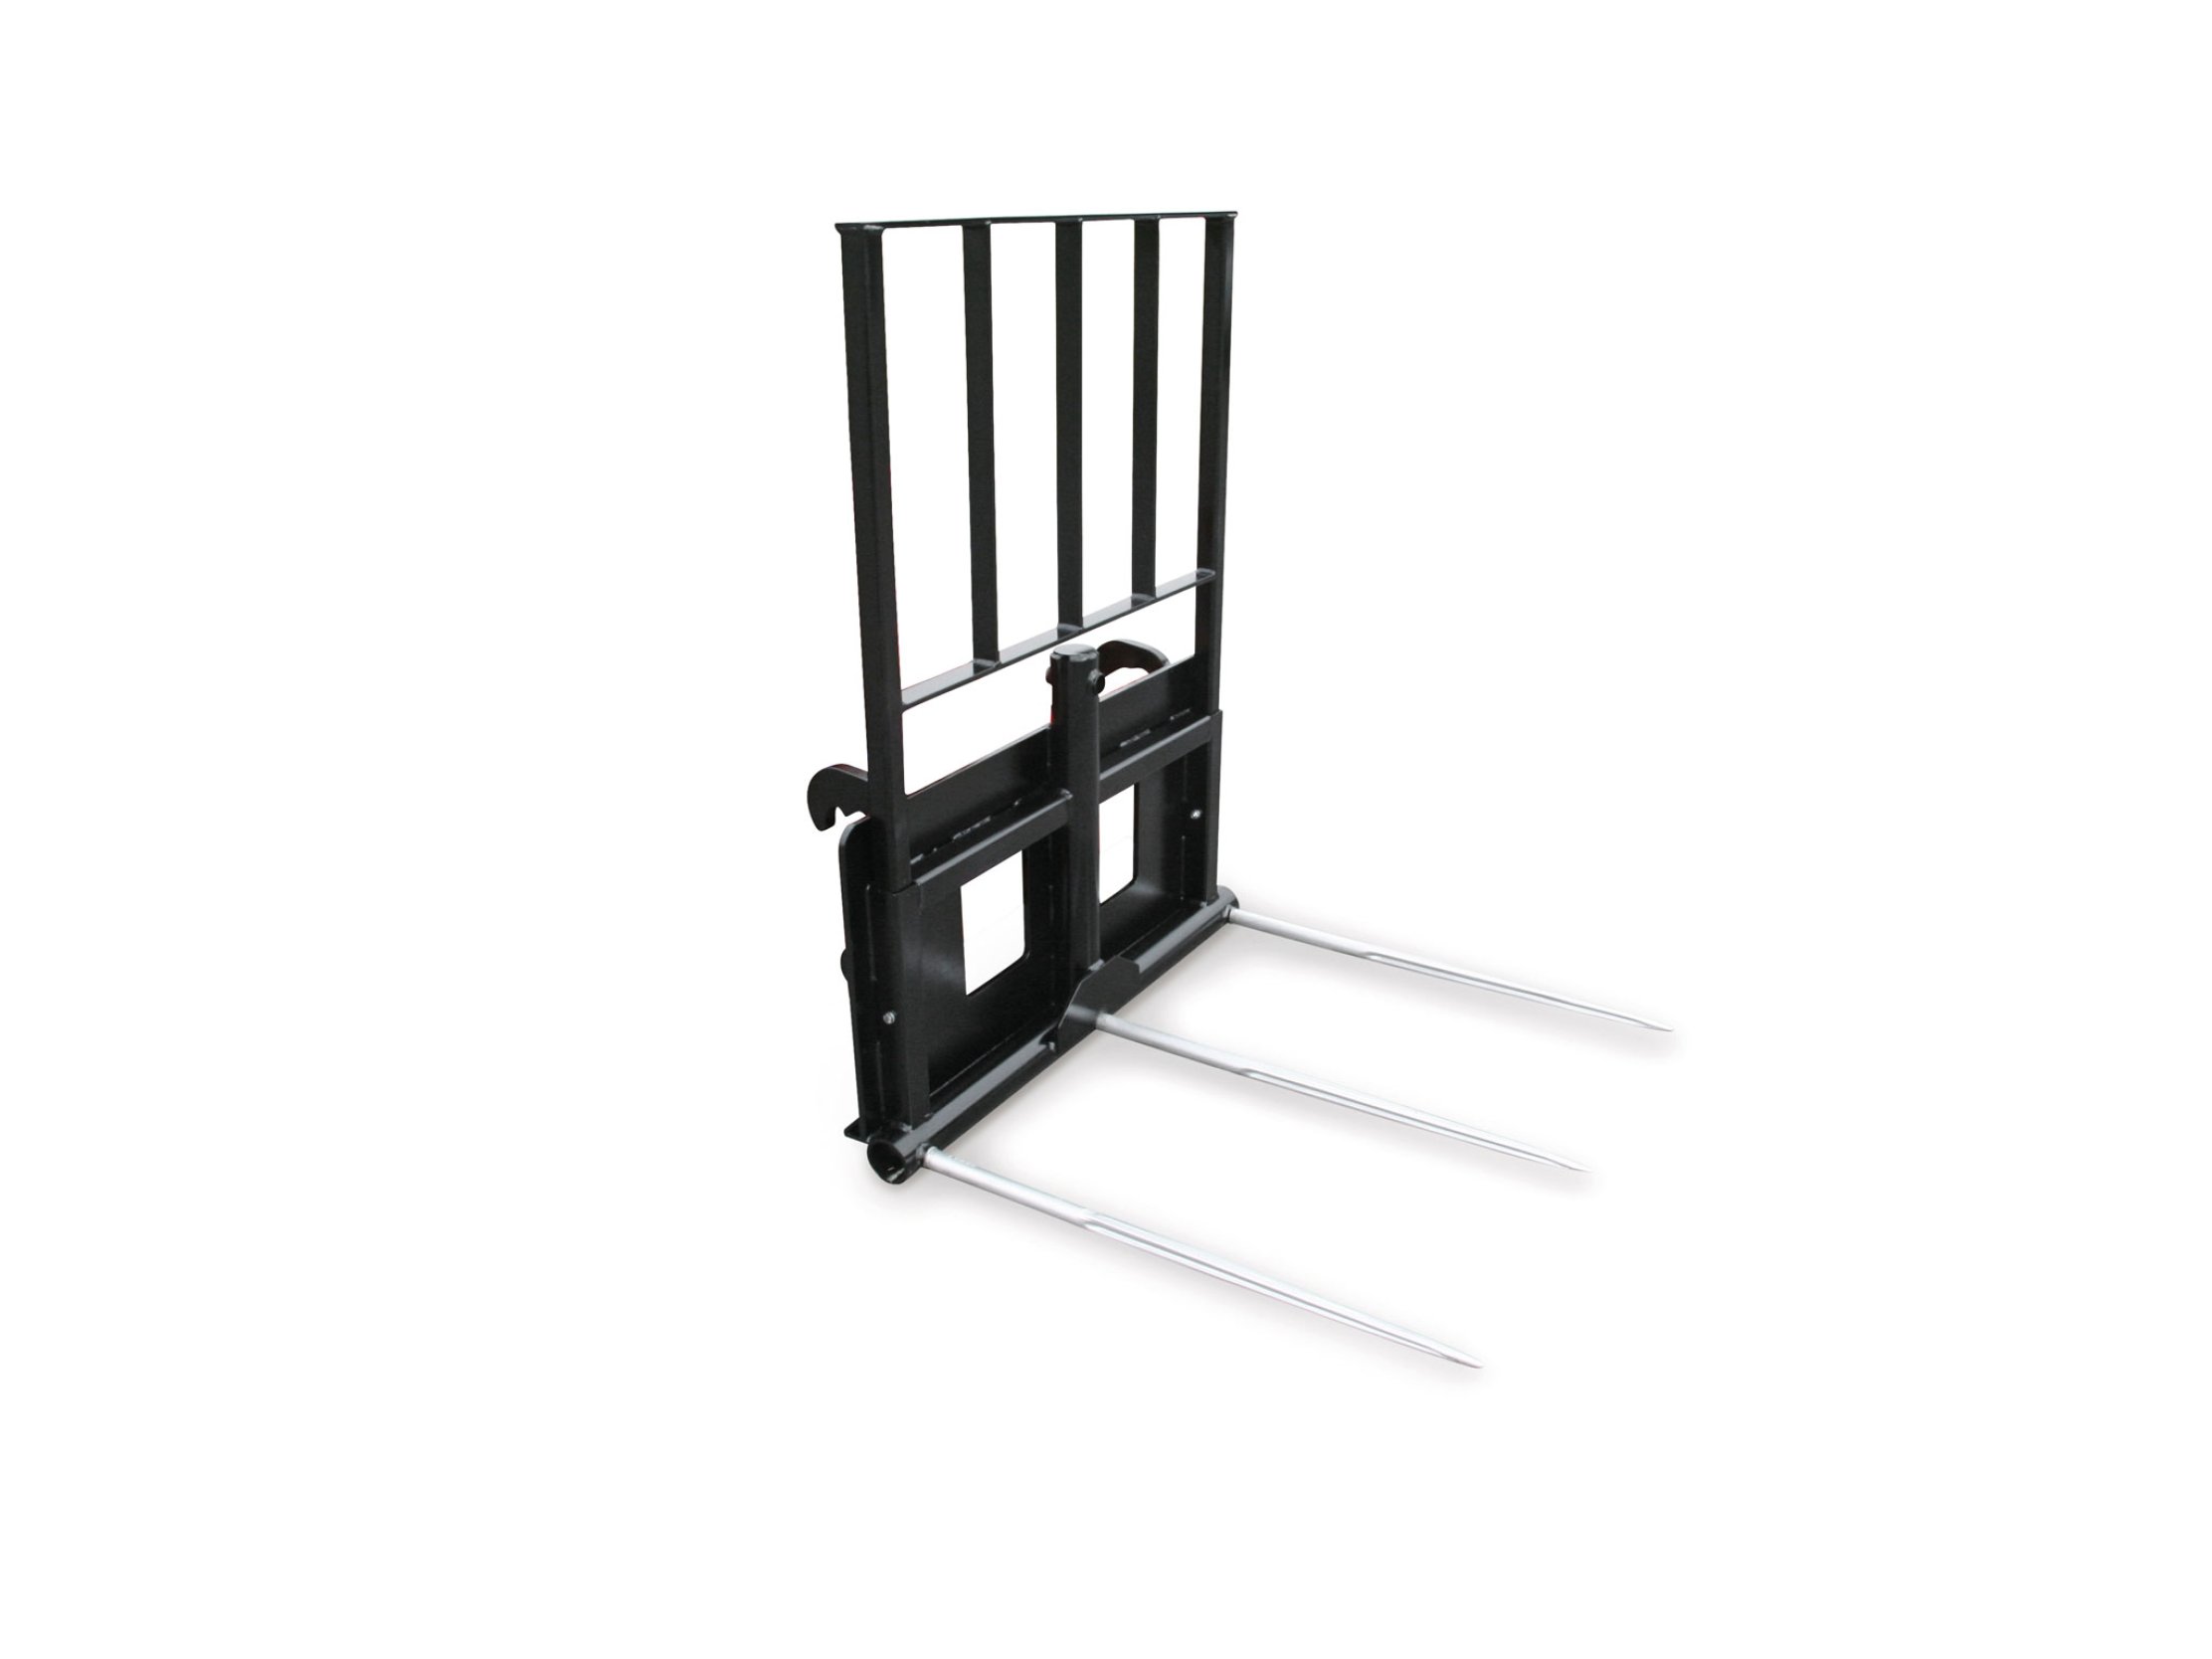 Large-scale bale fork with support frame